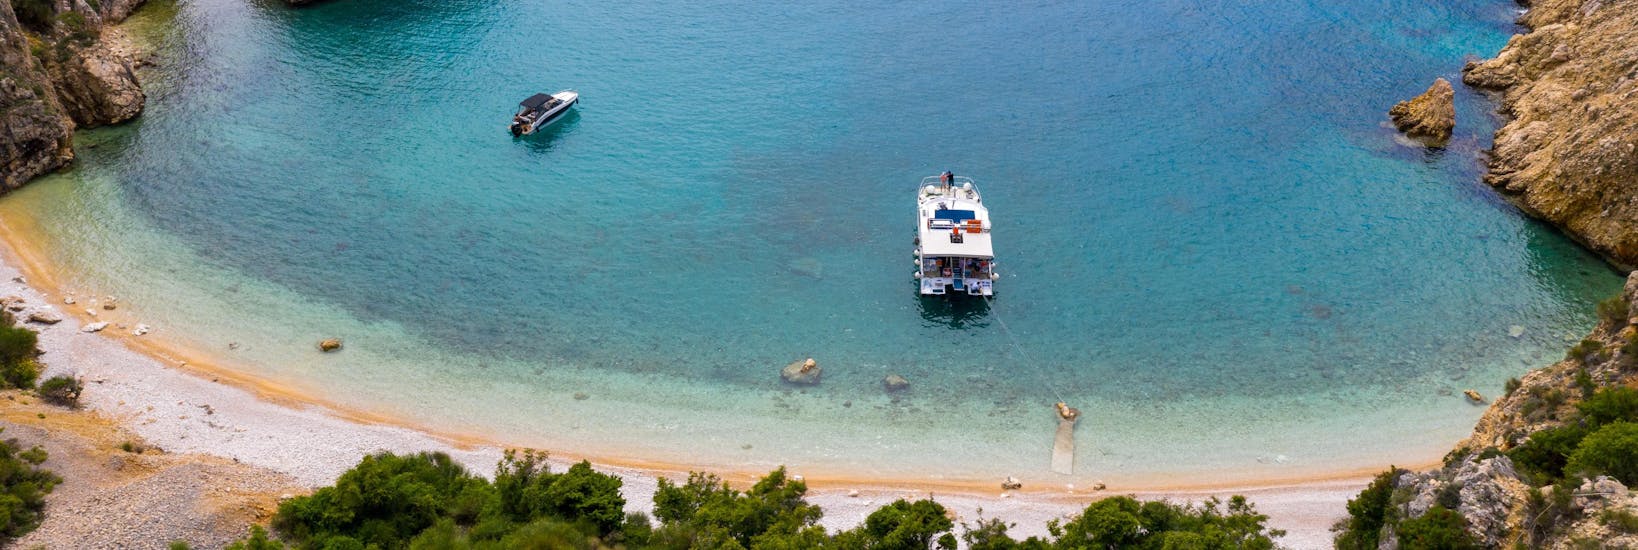 Picture of the boat from Plavnik Excursions Punat anchored in Fox Bay for a swimming stop.